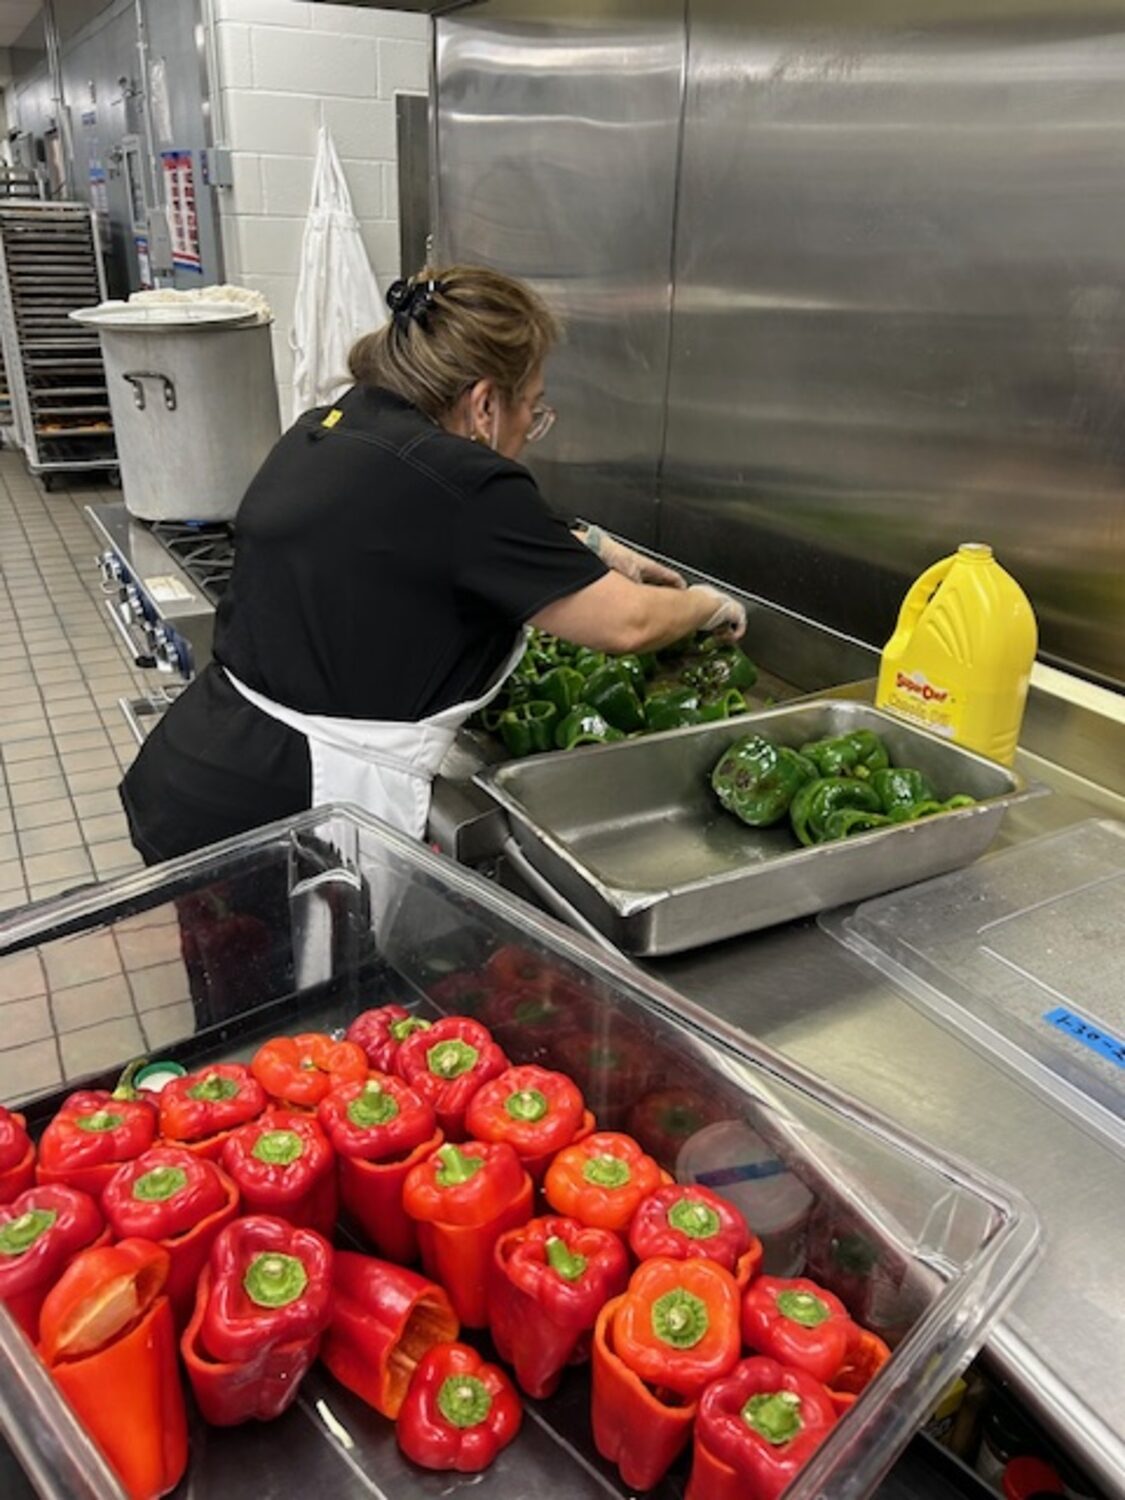 The Summer Food Service Program at Southampton Schools will include lots of fresh produce, some sourced from area farms. COURTESY REGAN KIEMBOCK